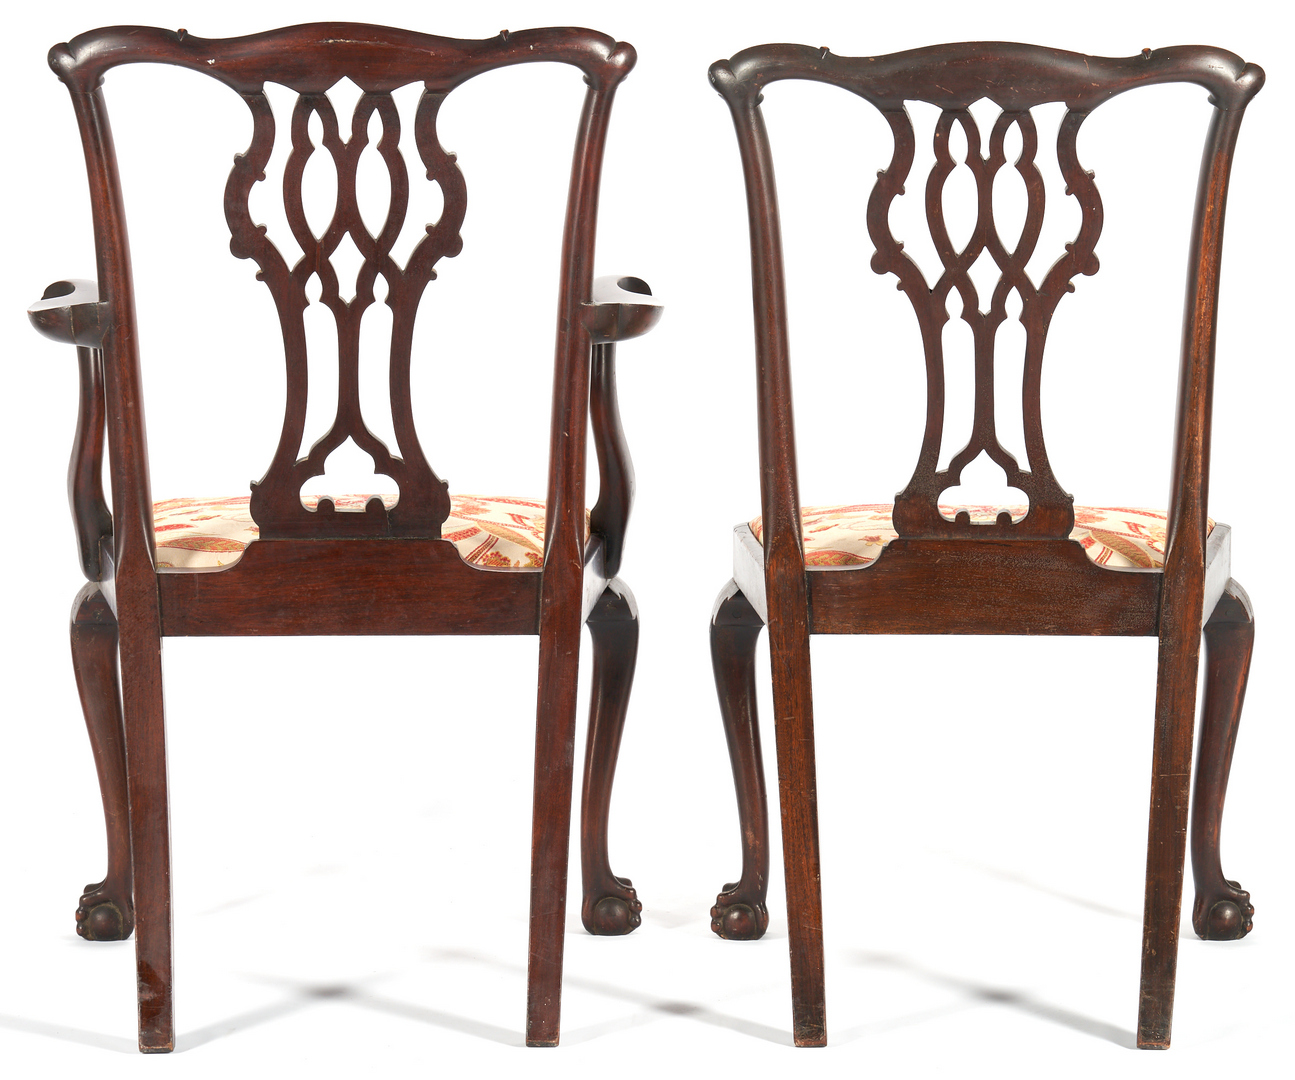 Lot 152: Set of 7 Chippendale Style Carved Mahogany Dining Chairs